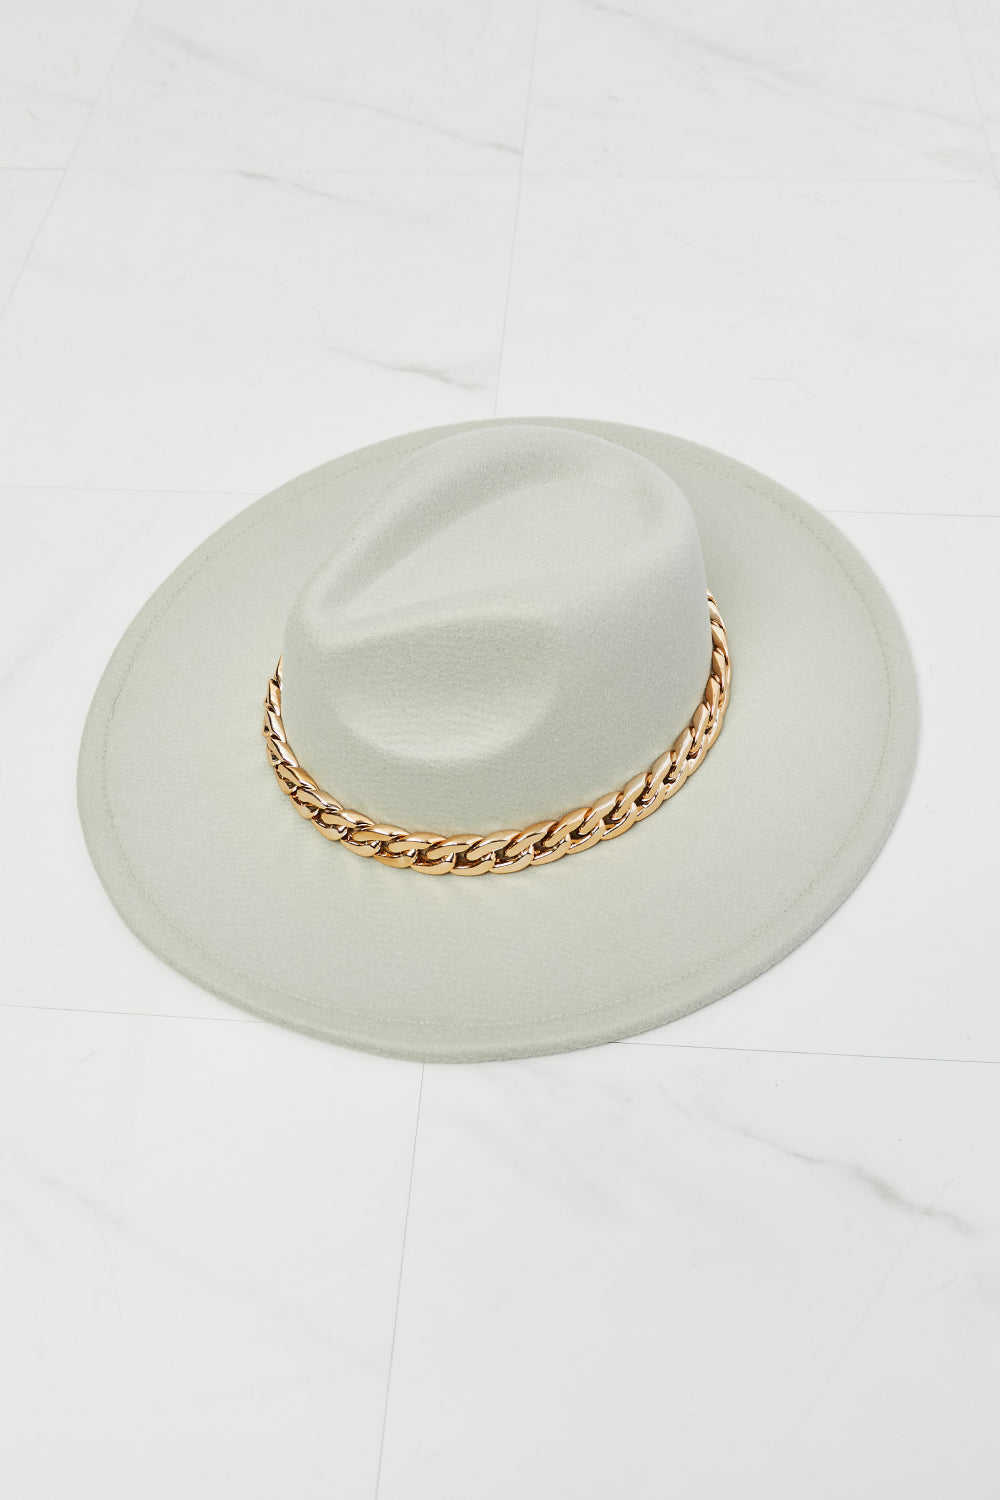 Fame Keep Your Promise Fedora Hat in Mint - Scarvesnthangs